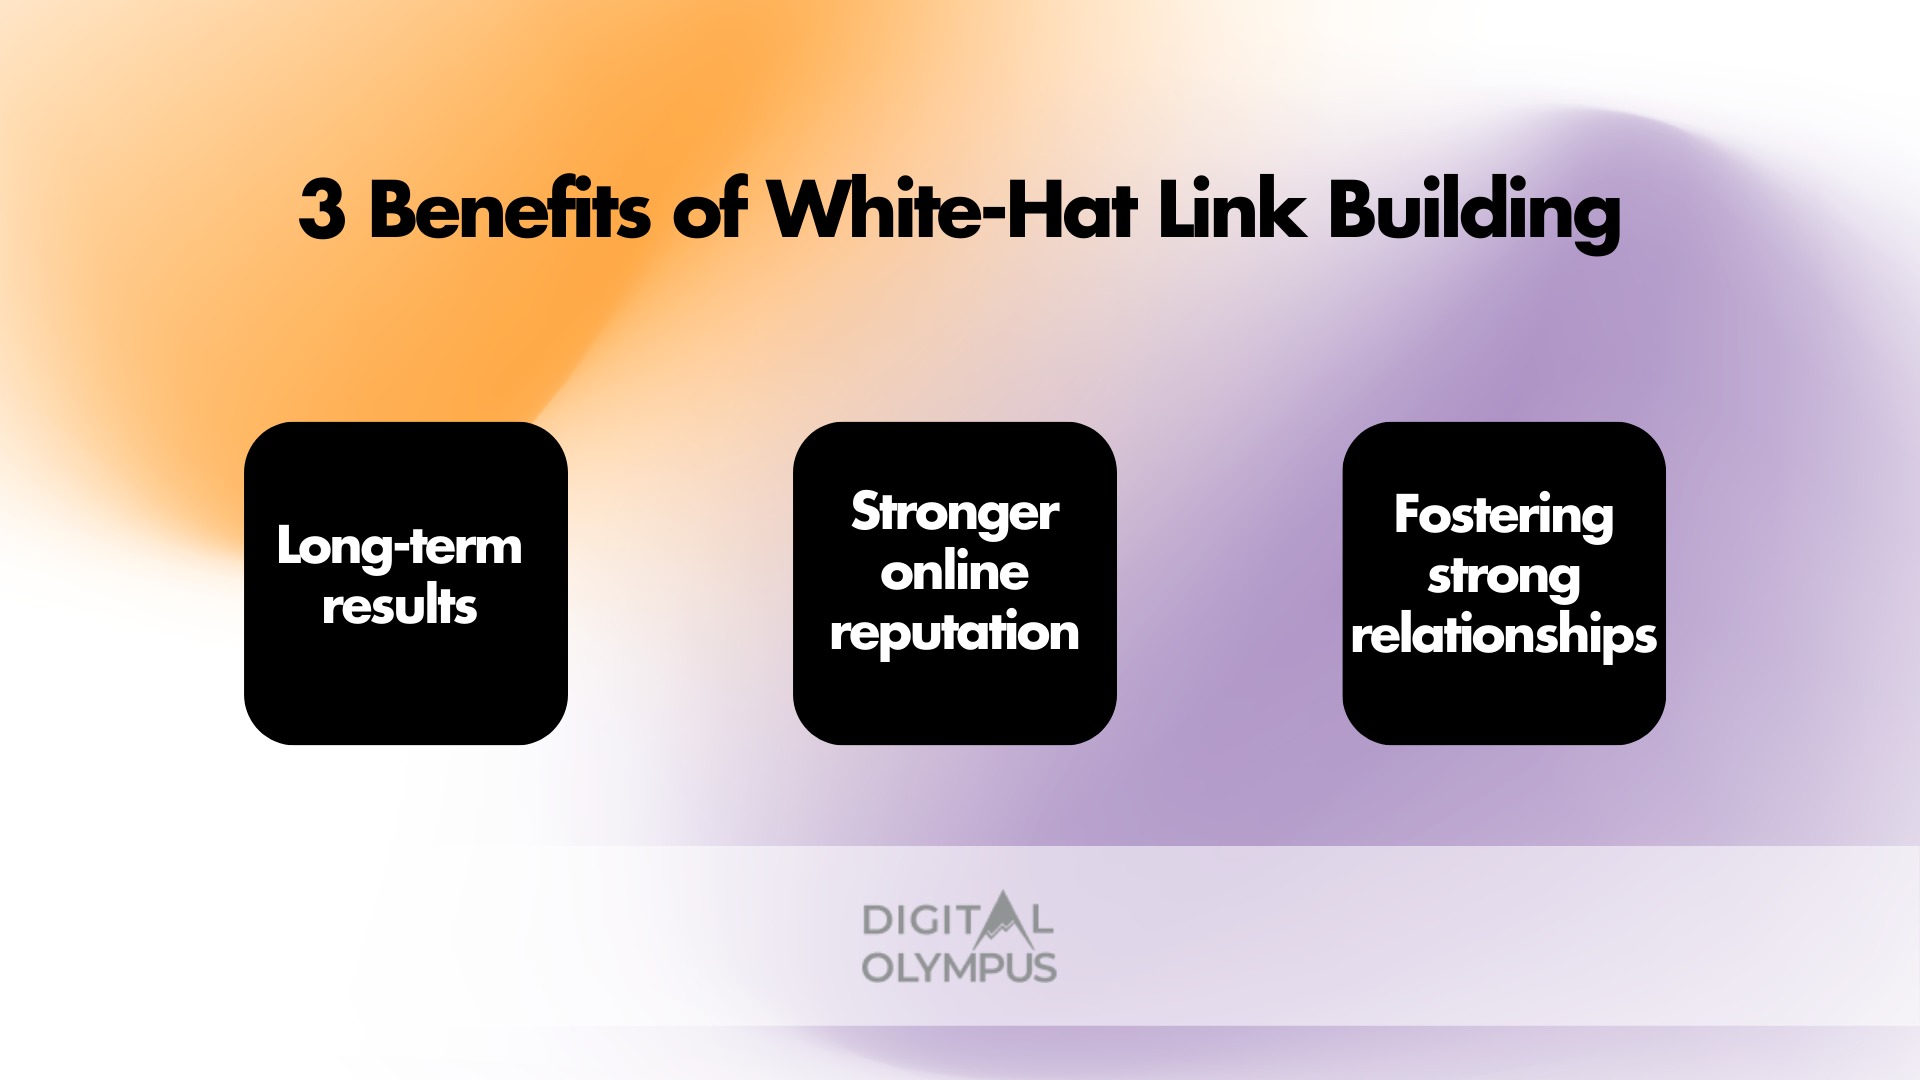 Benefits of White-Hat Link Building